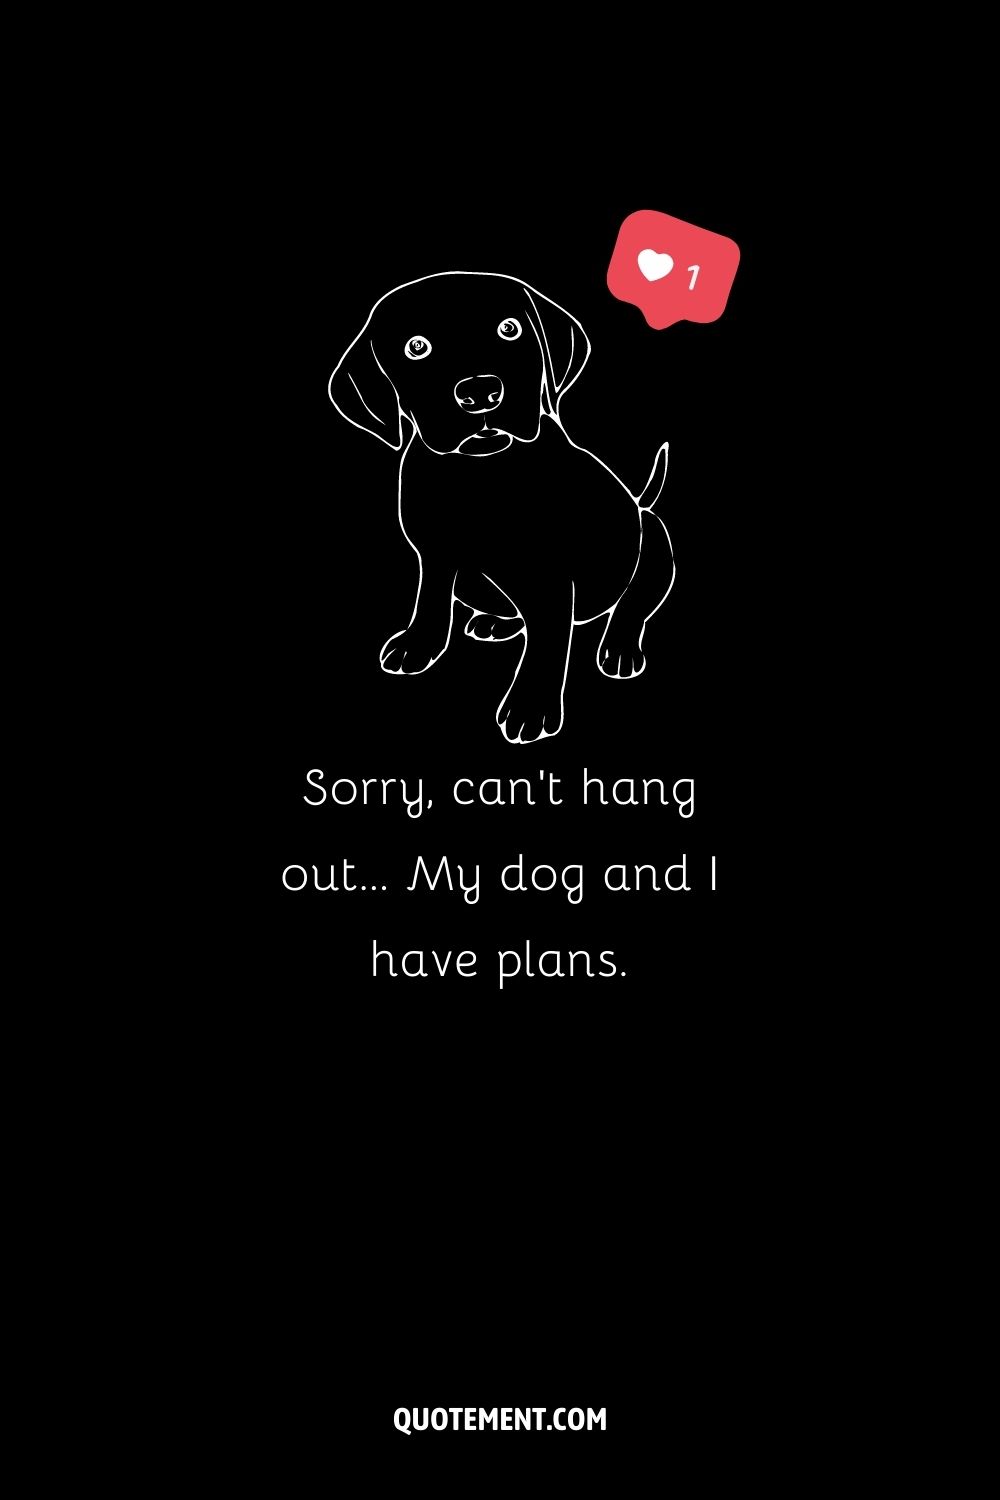 Illustration of a dog and a notification representing a cute dog caption for Ig